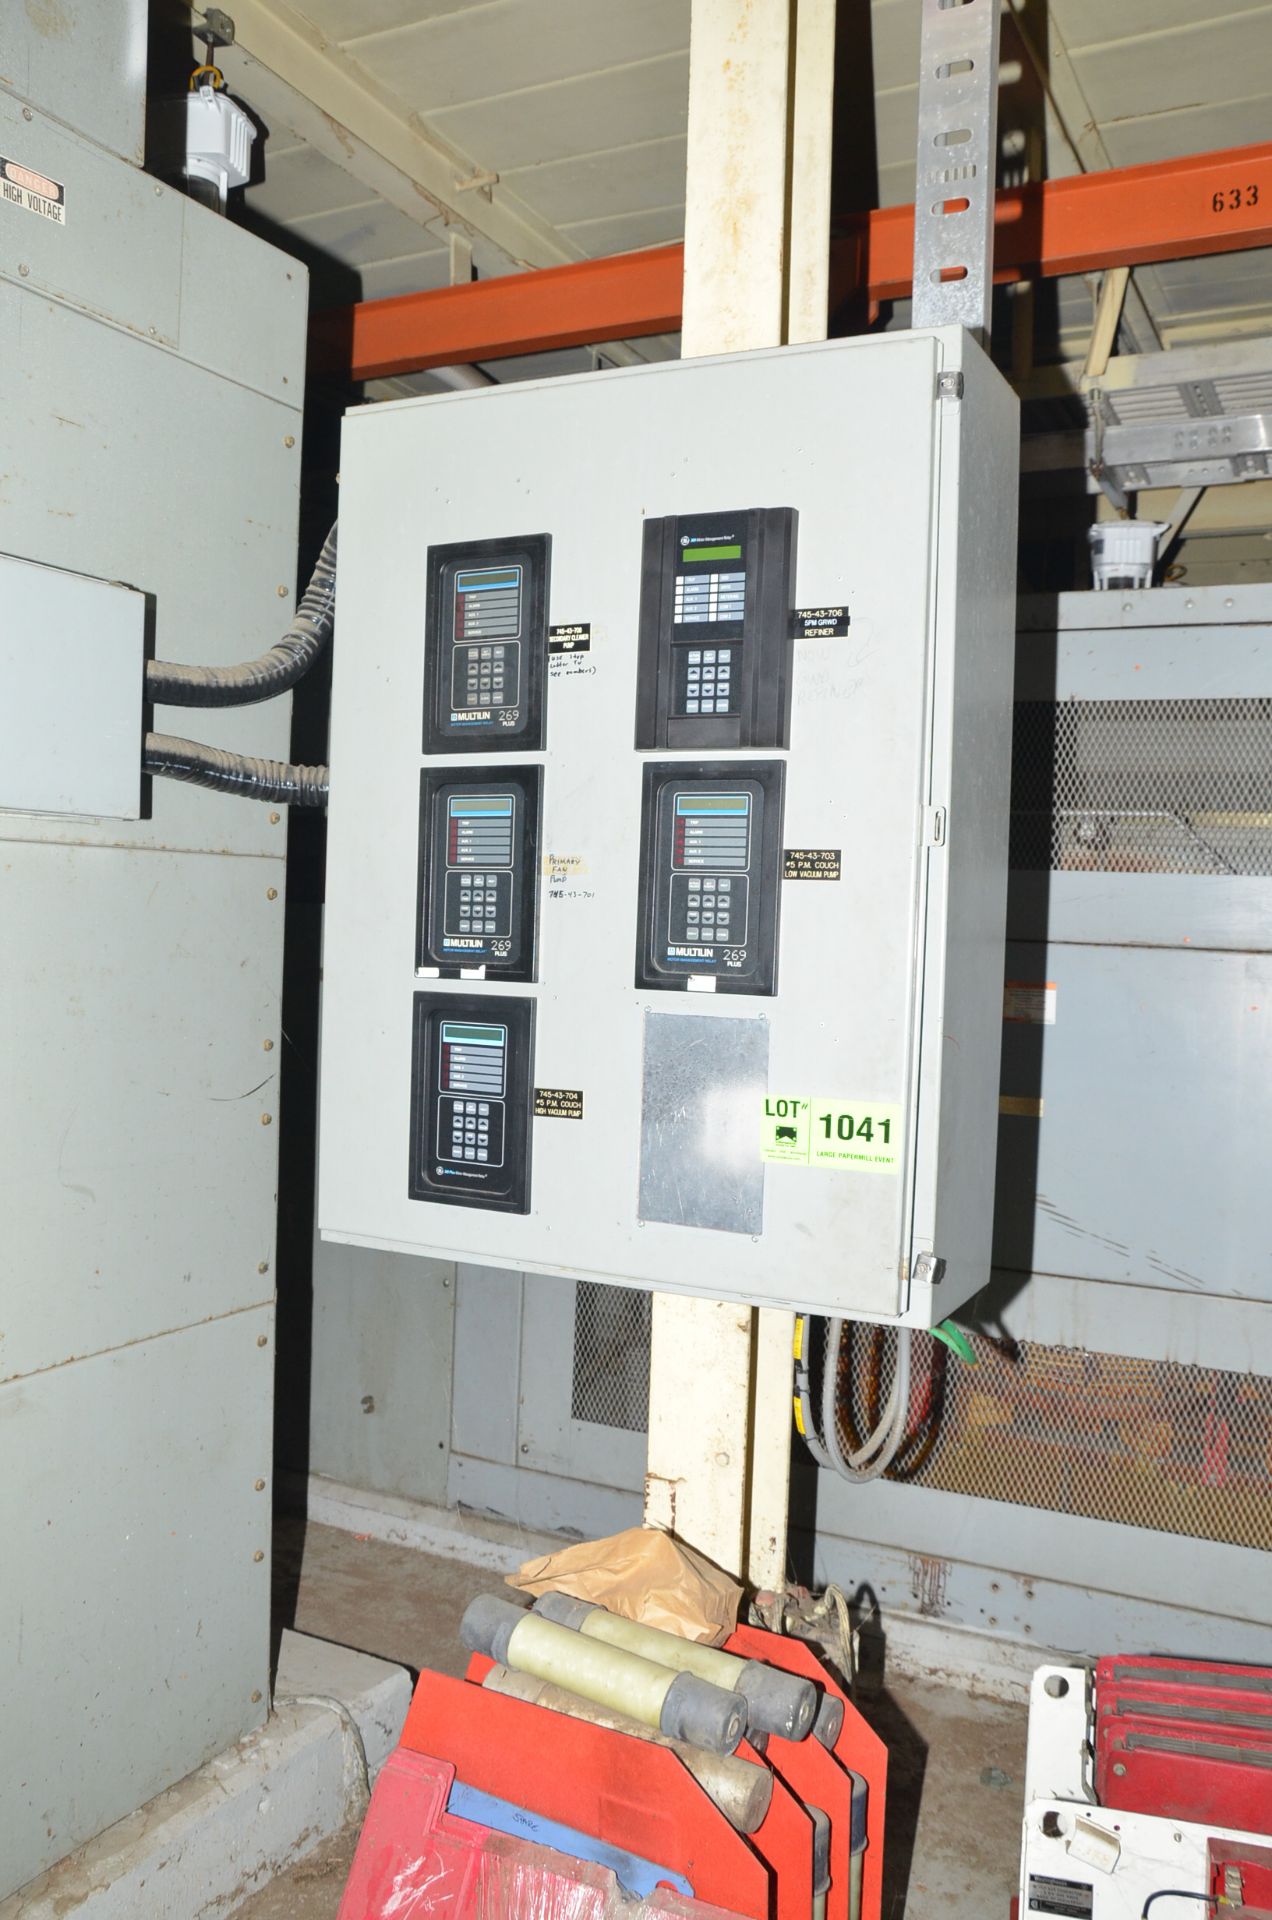 LOT/ ABB DIGITAL VFD CABINET, S/N N/A [RIGGING FEES FOR LOT #1041 - $175 USD PLUS APPLICABLE TAXES]